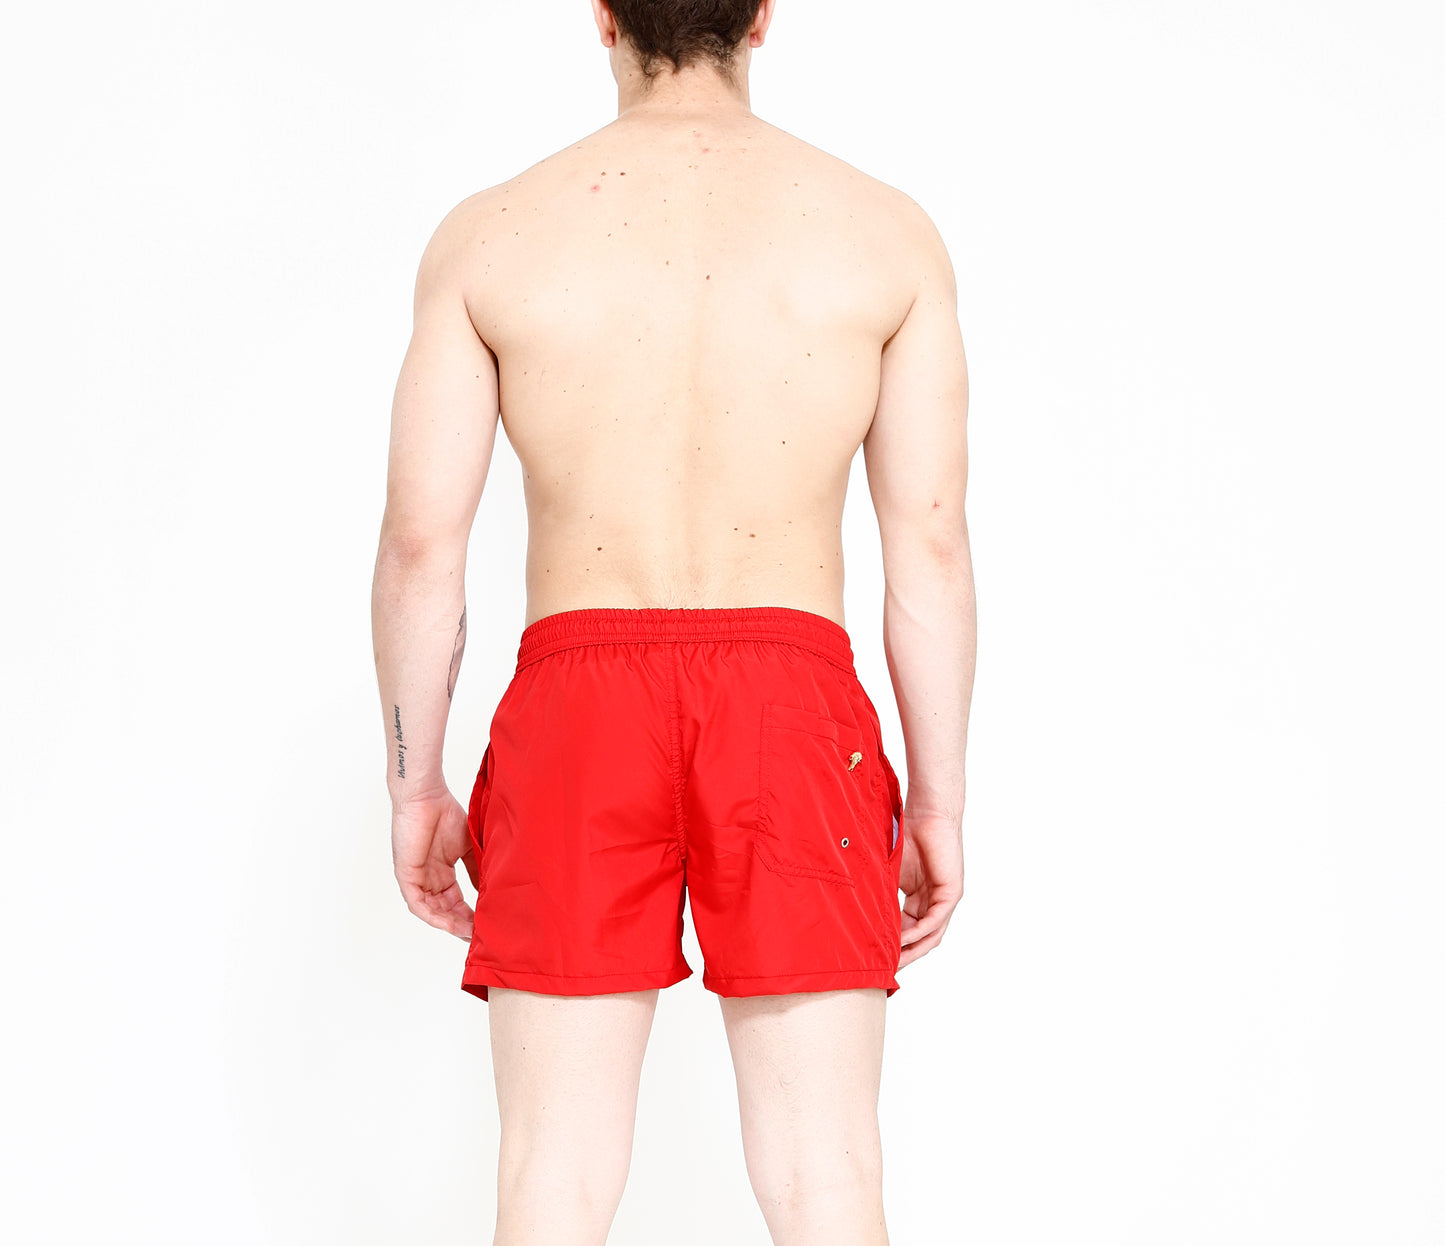 Men's Boxer "Miracle Mile" Red